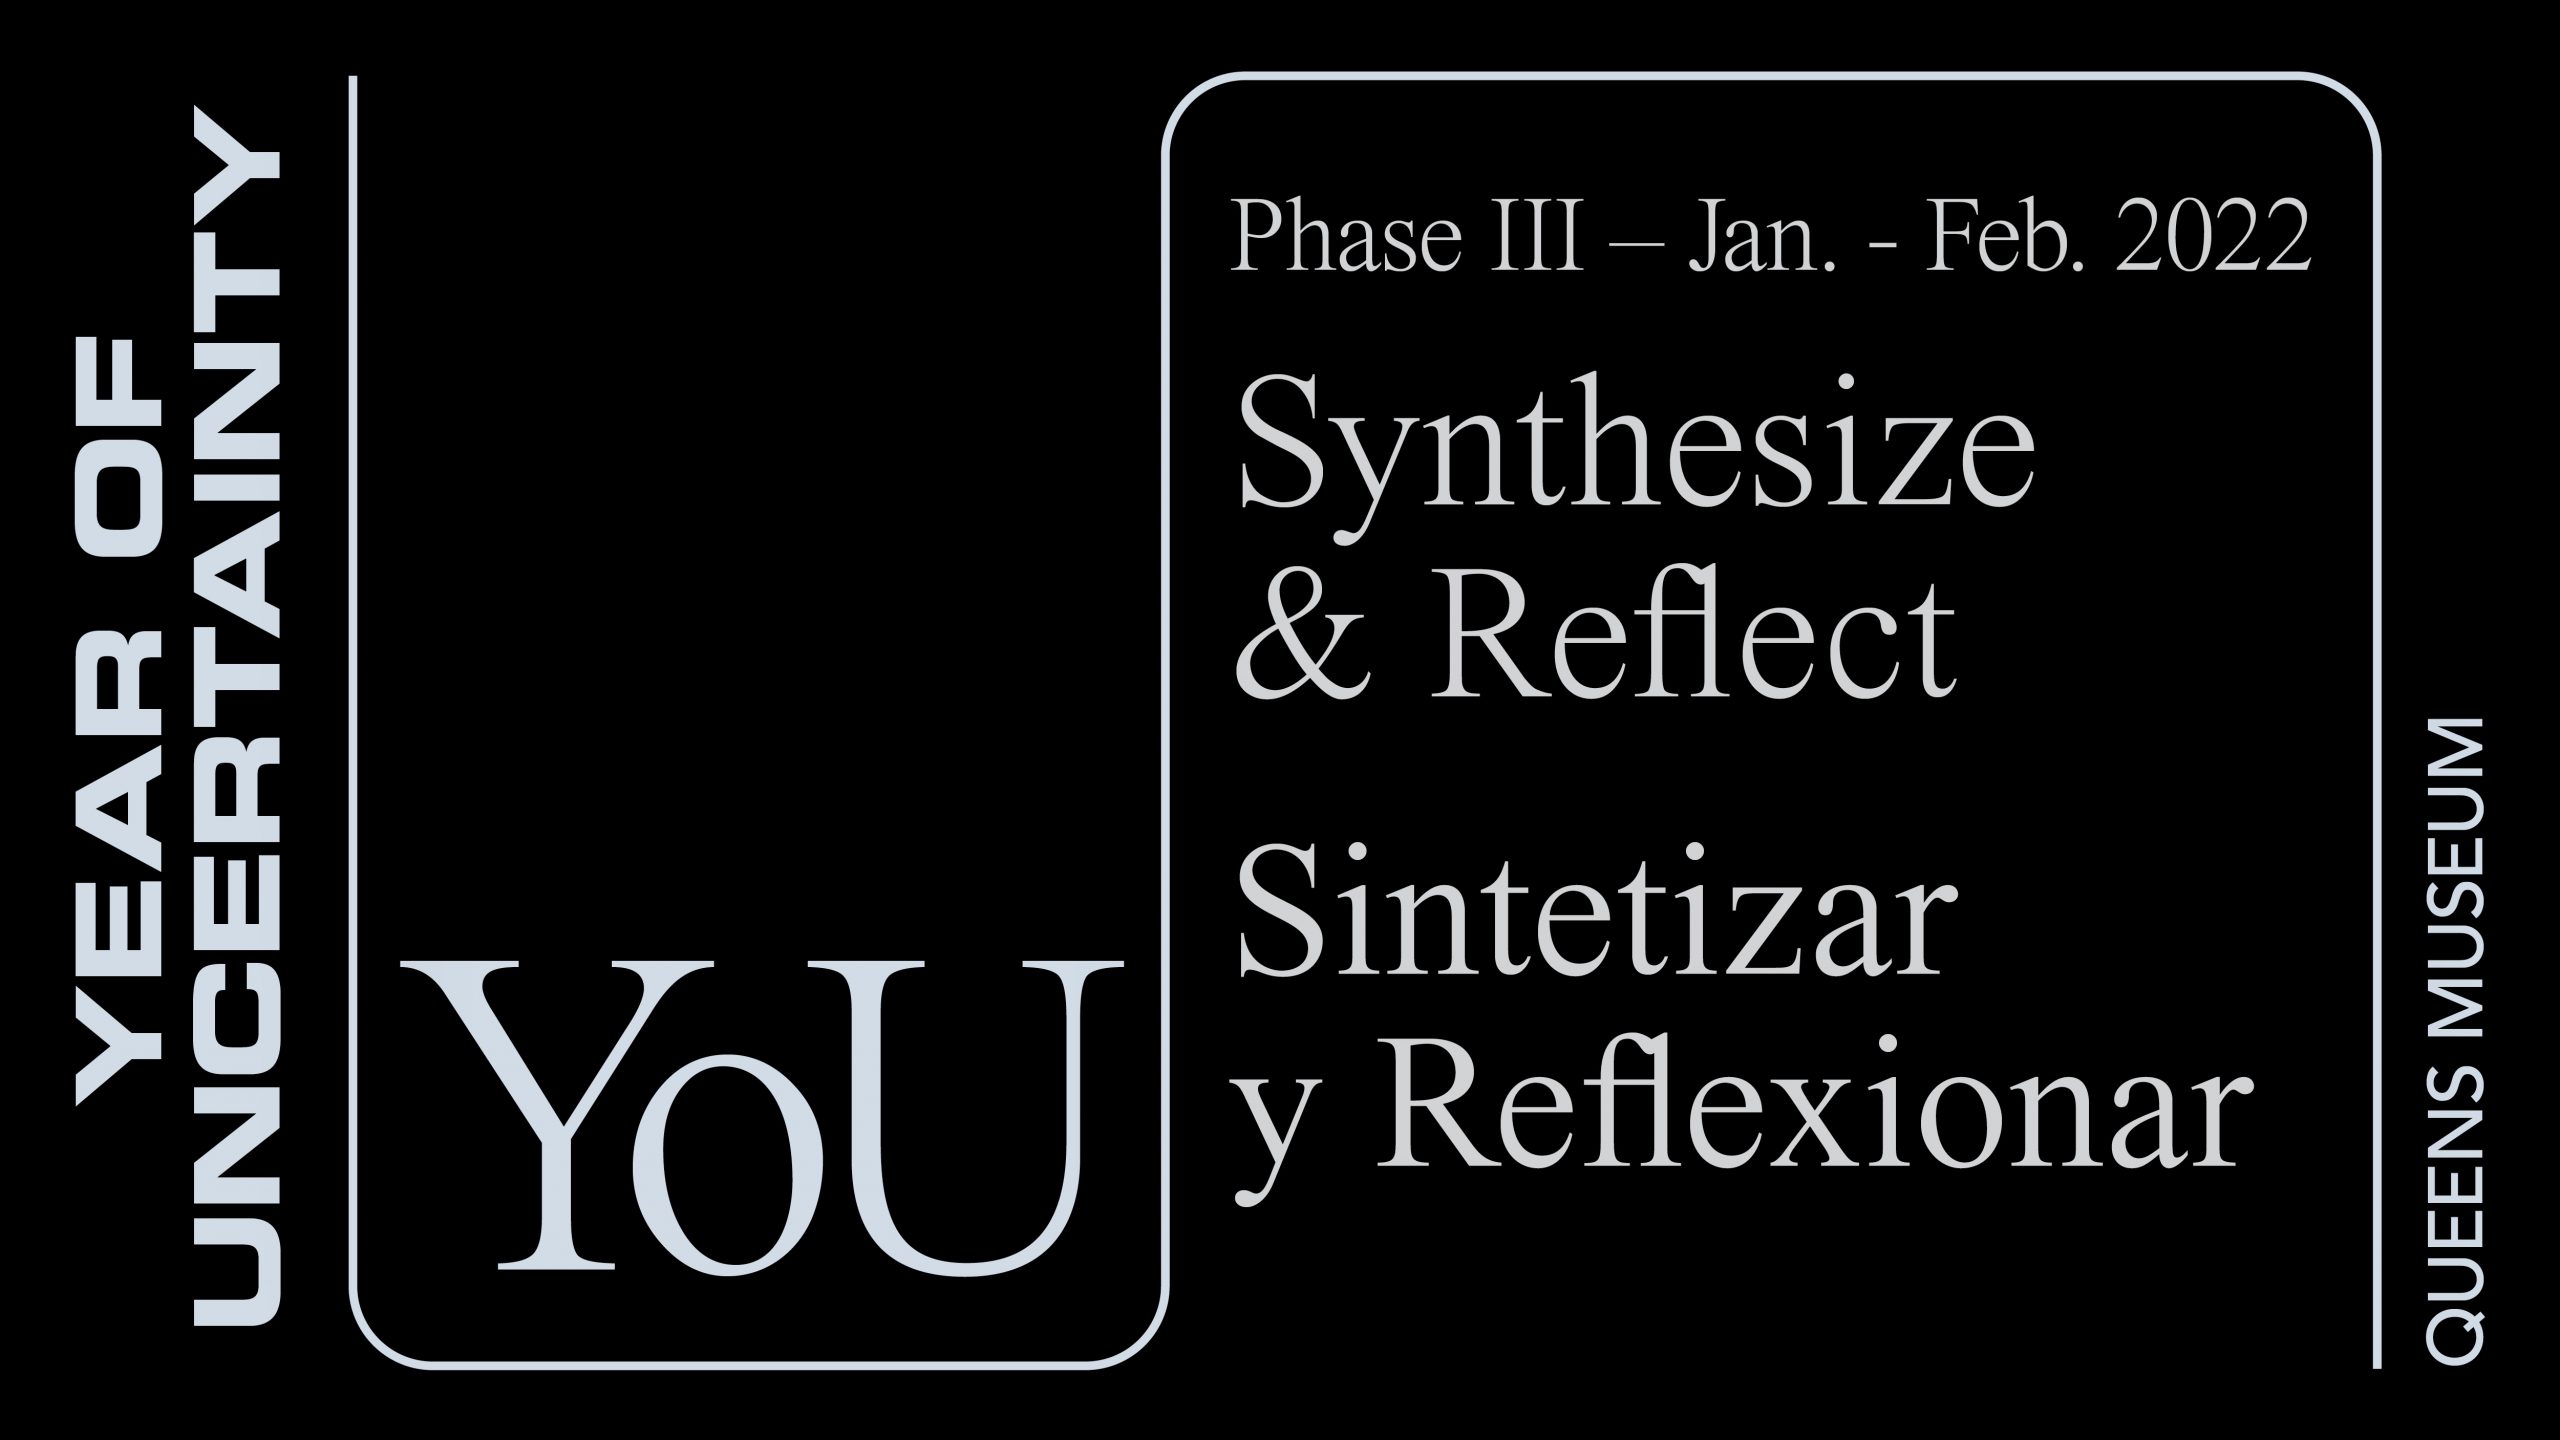 A black, title slide with four pieces of white text. The text shifts orientation from horizontal to vertical, along a “s” shape line on its side. From left to right the text reads: Year of Uncertainty, You, Phase Three, January through February 2022, Synthesize & Reflect, Sintetizar y Reflexionar, Queens Museum.